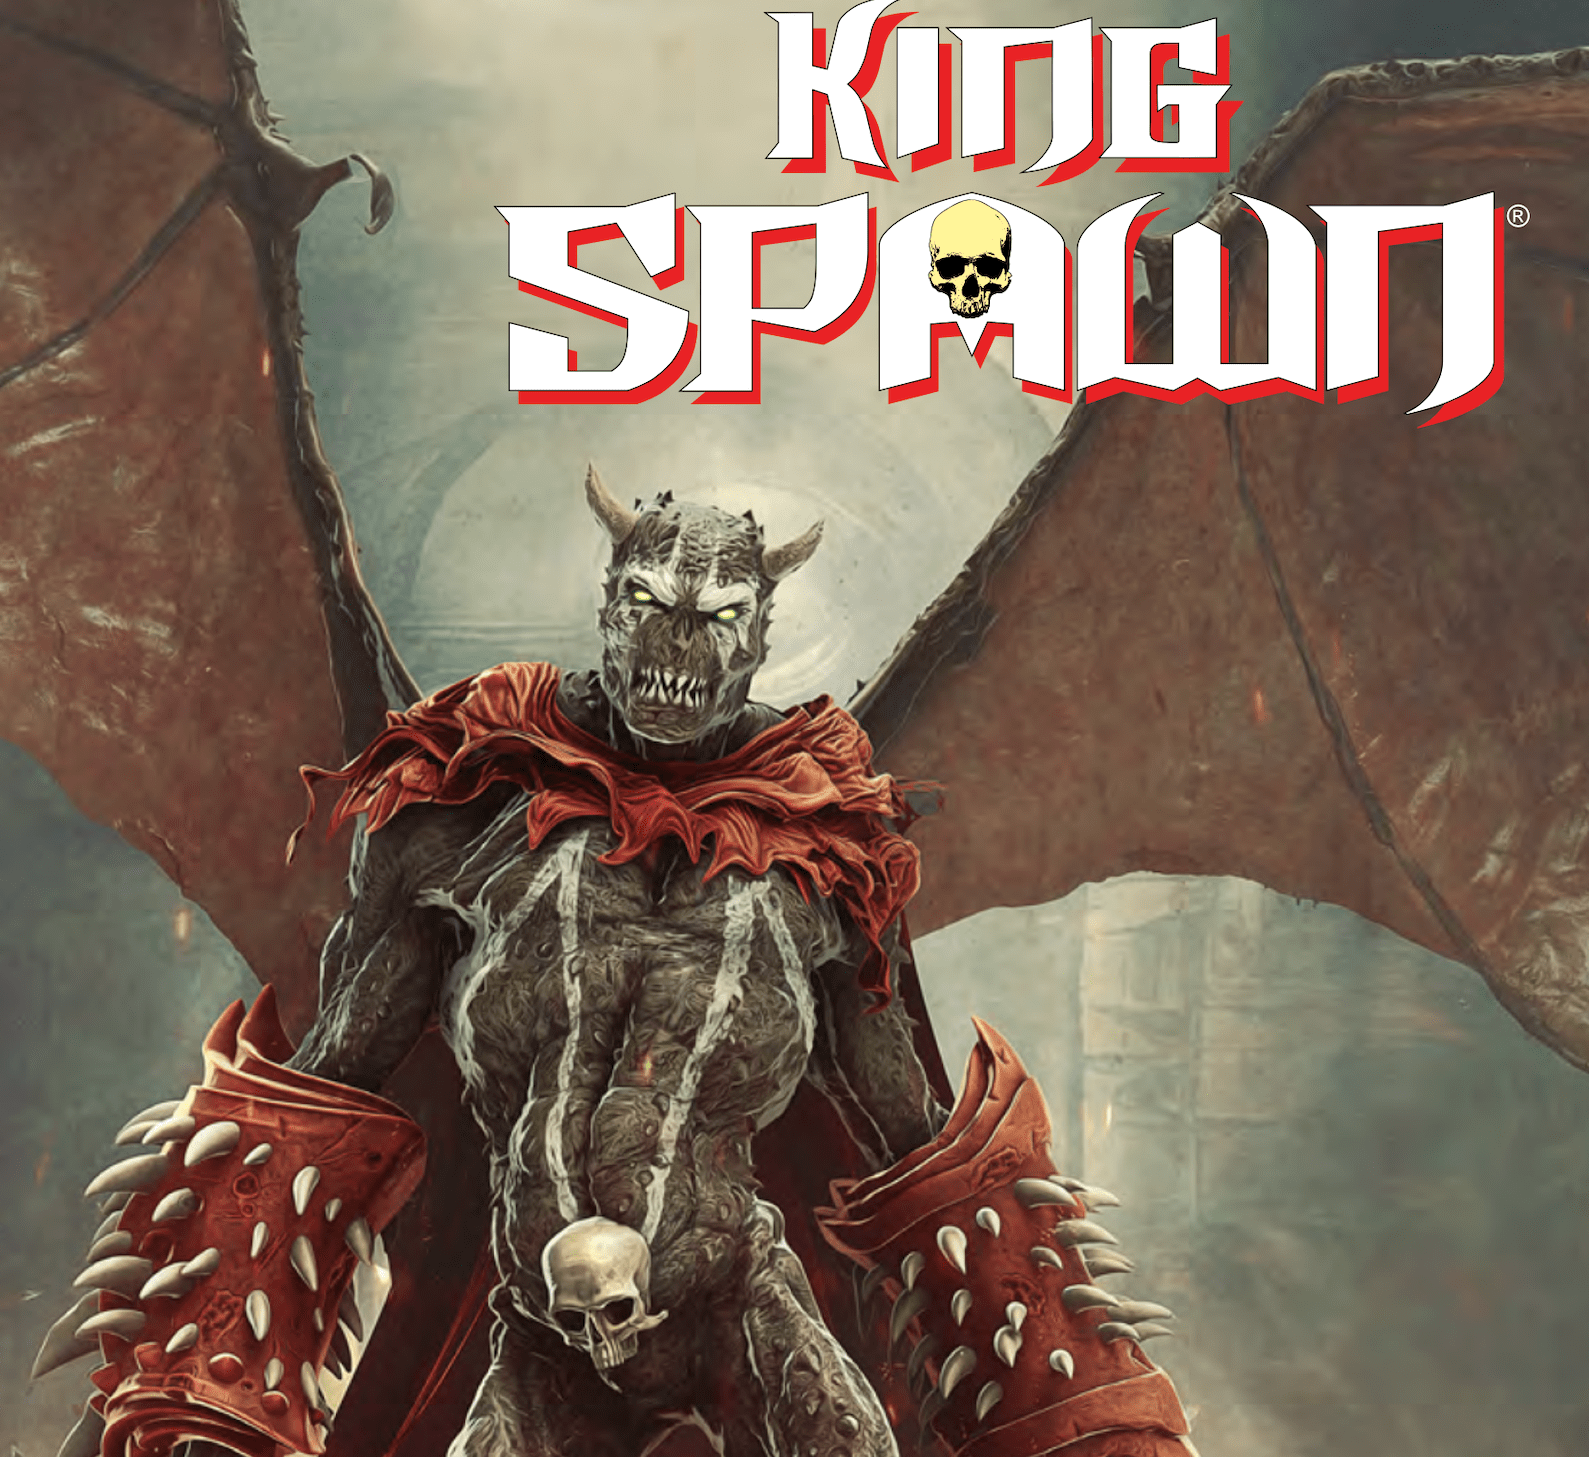 'King Spawn' #9 forces Albert to look within as he battles monsters